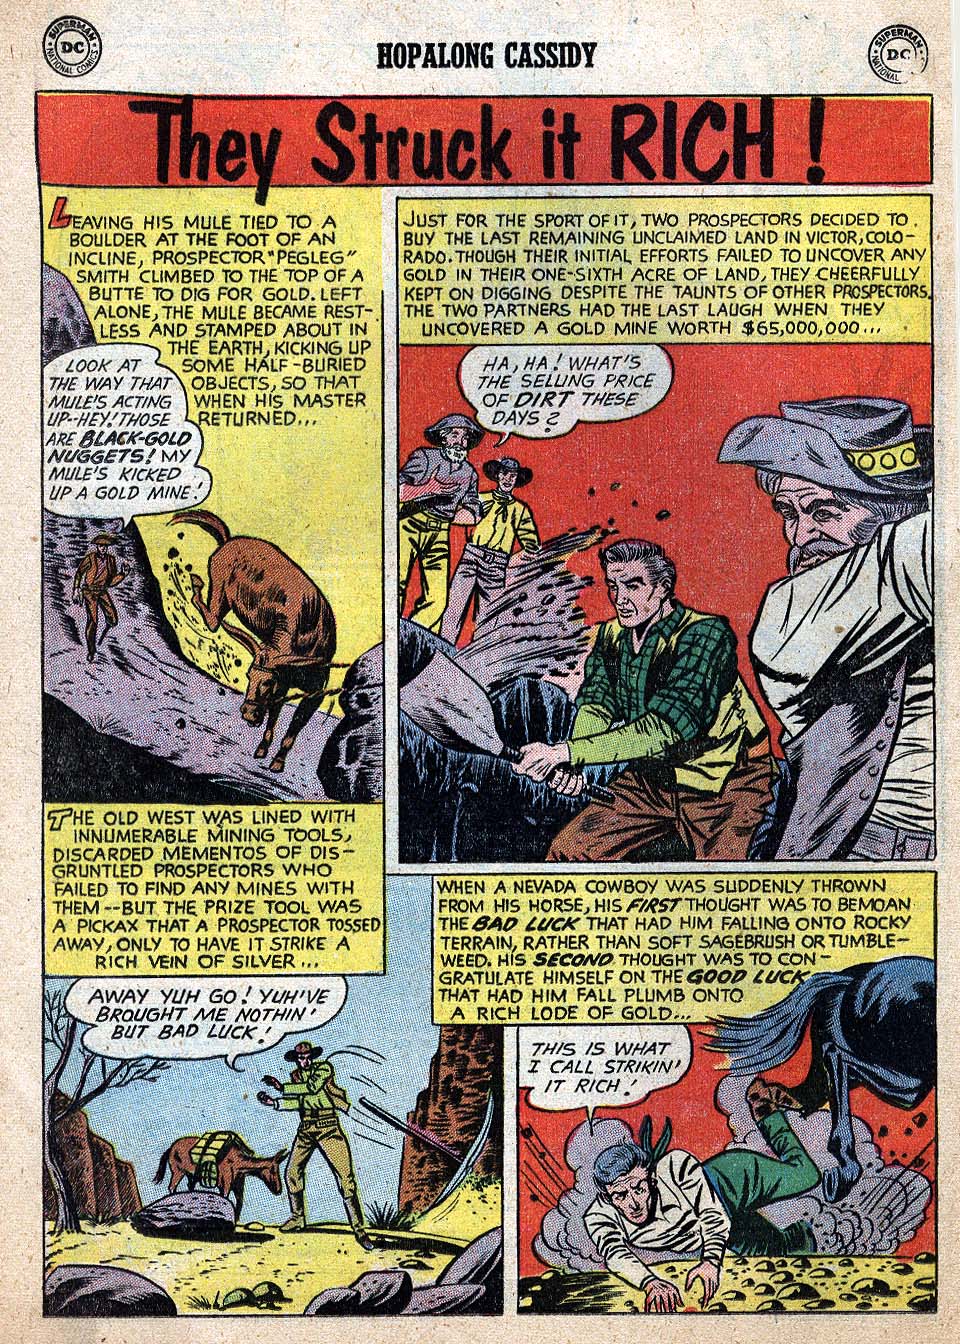 Read online Hopalong Cassidy comic -  Issue #102 - 12